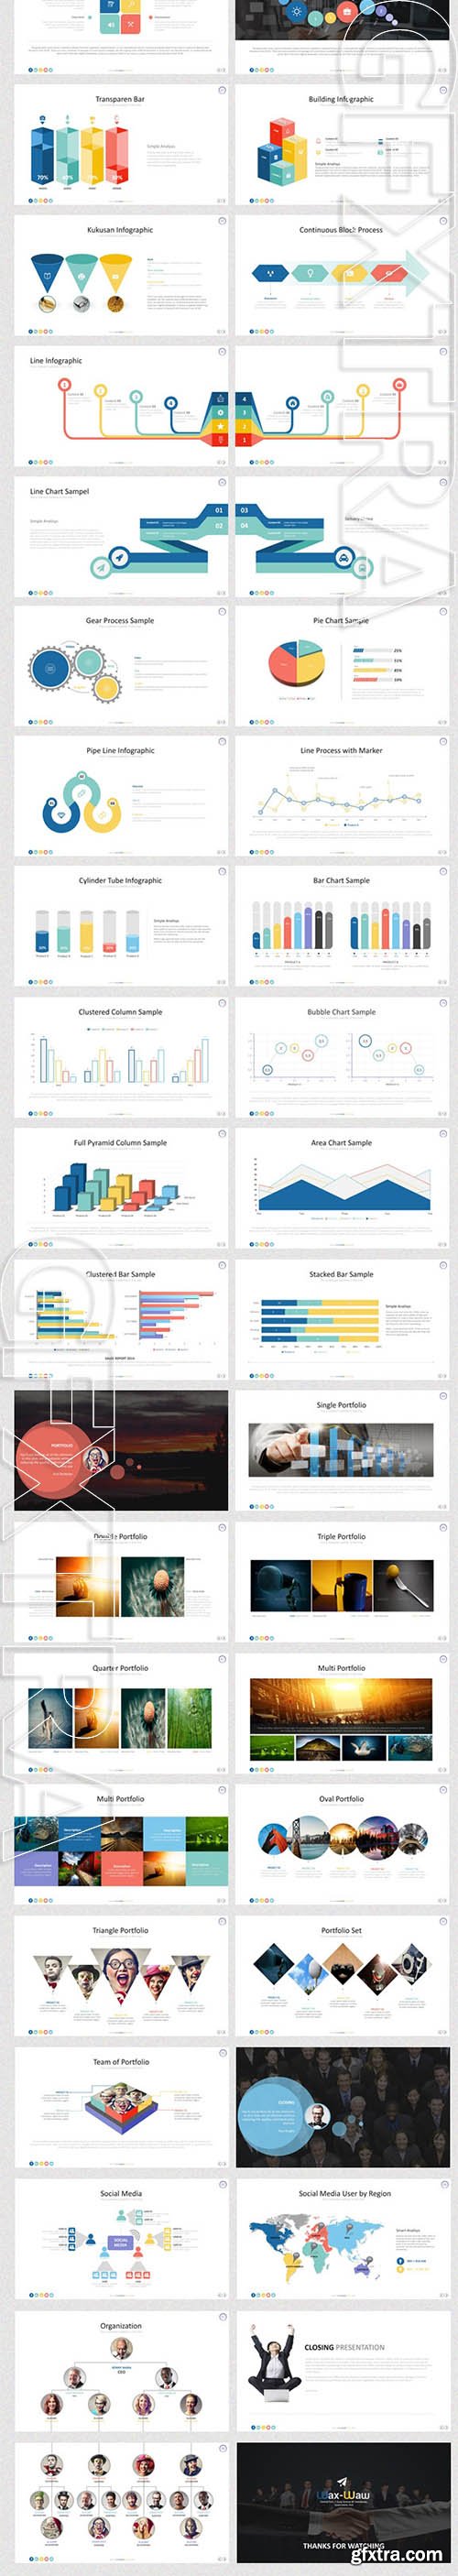 Wakwaw Powerpoint Template - Graphicriver 9966343